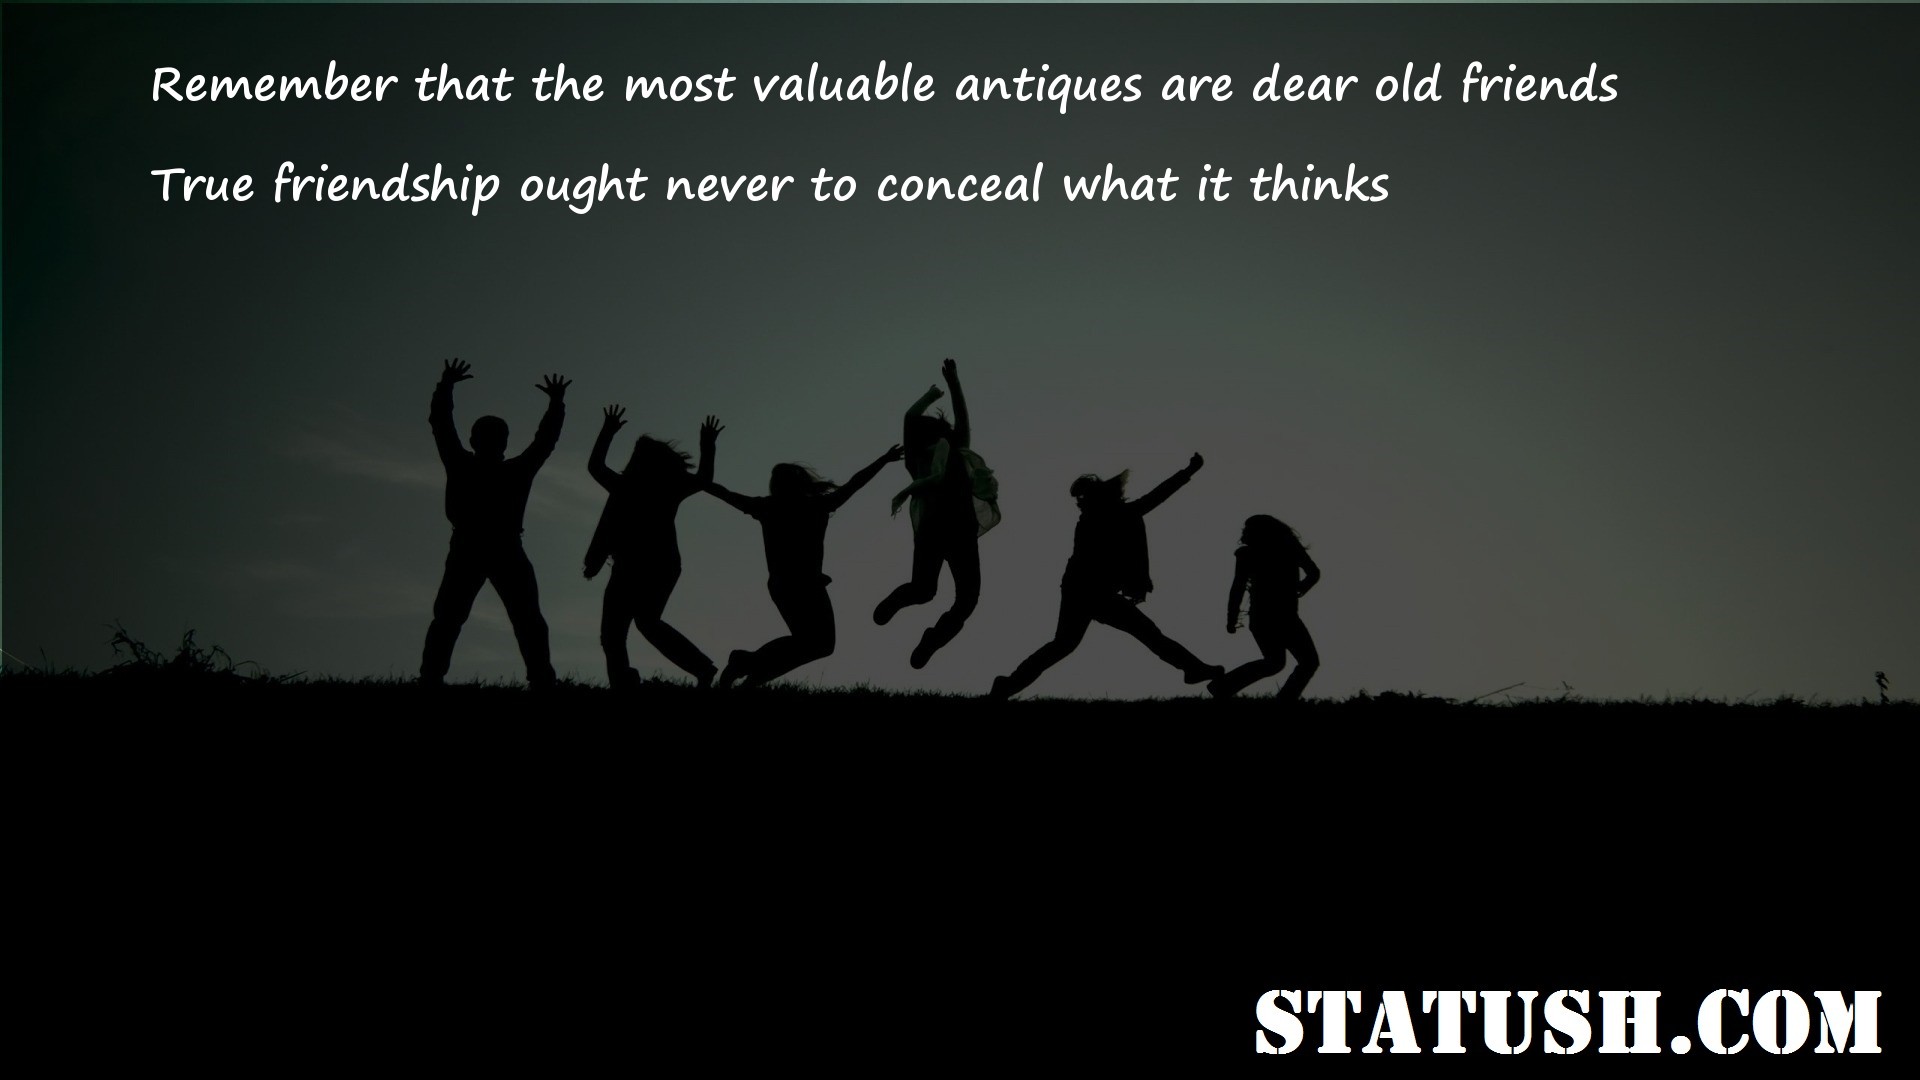 Remember that the most valuable antiques are dear old friends